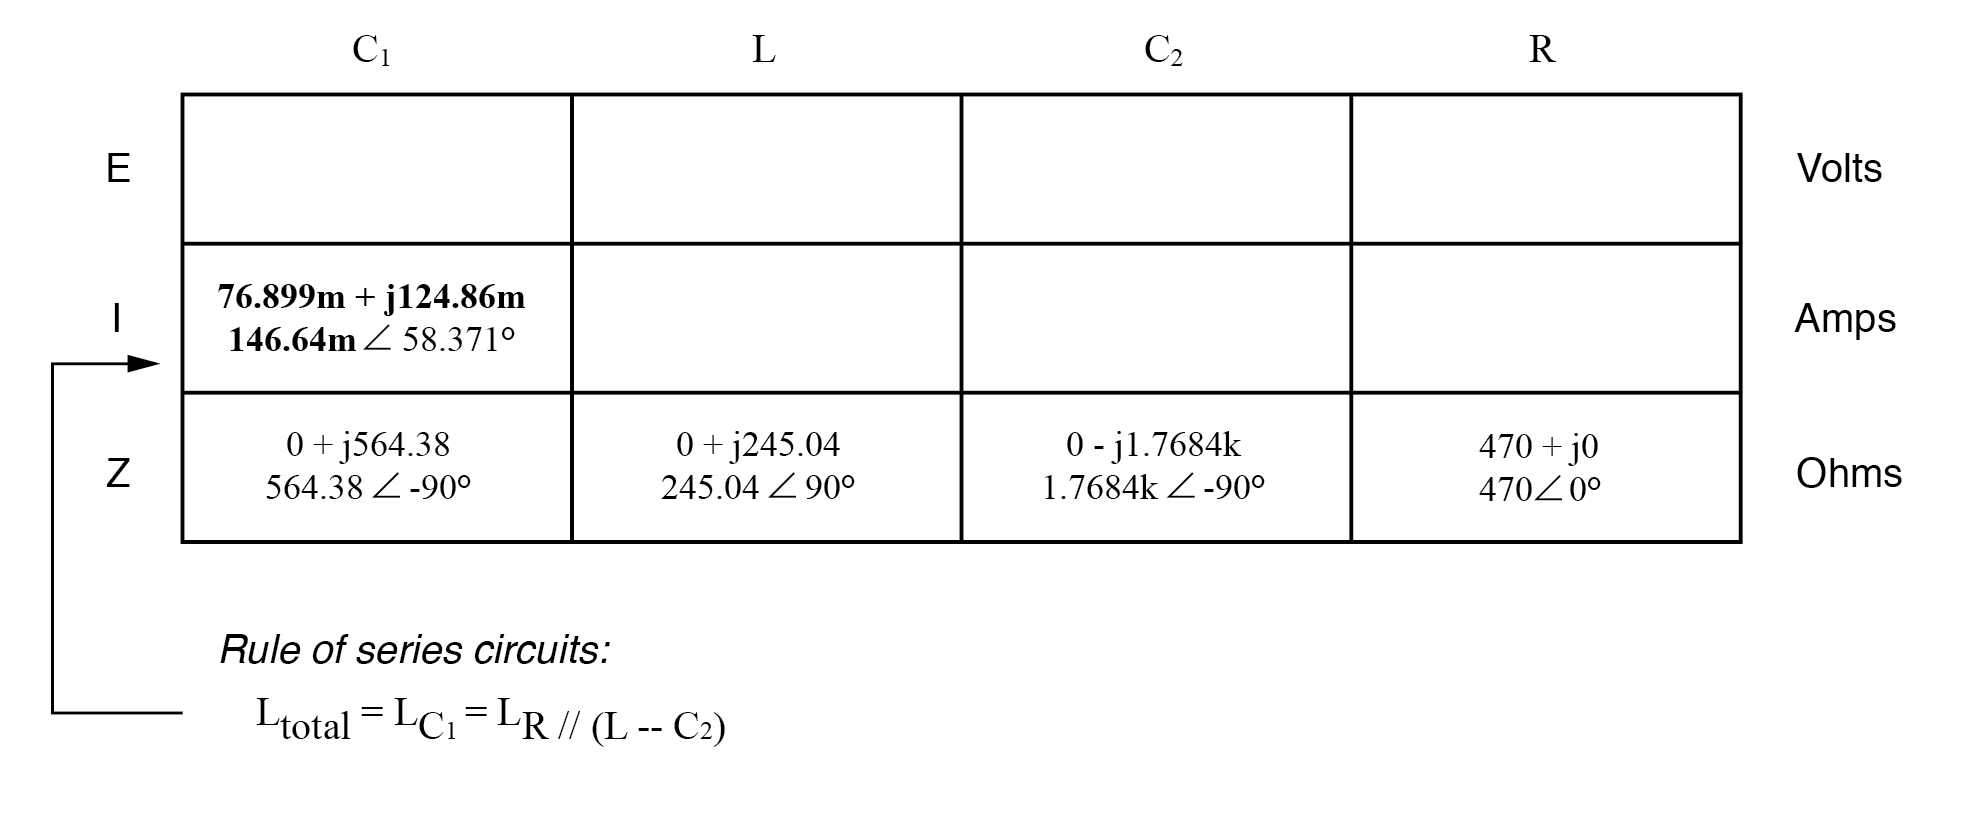 initial values in table 5